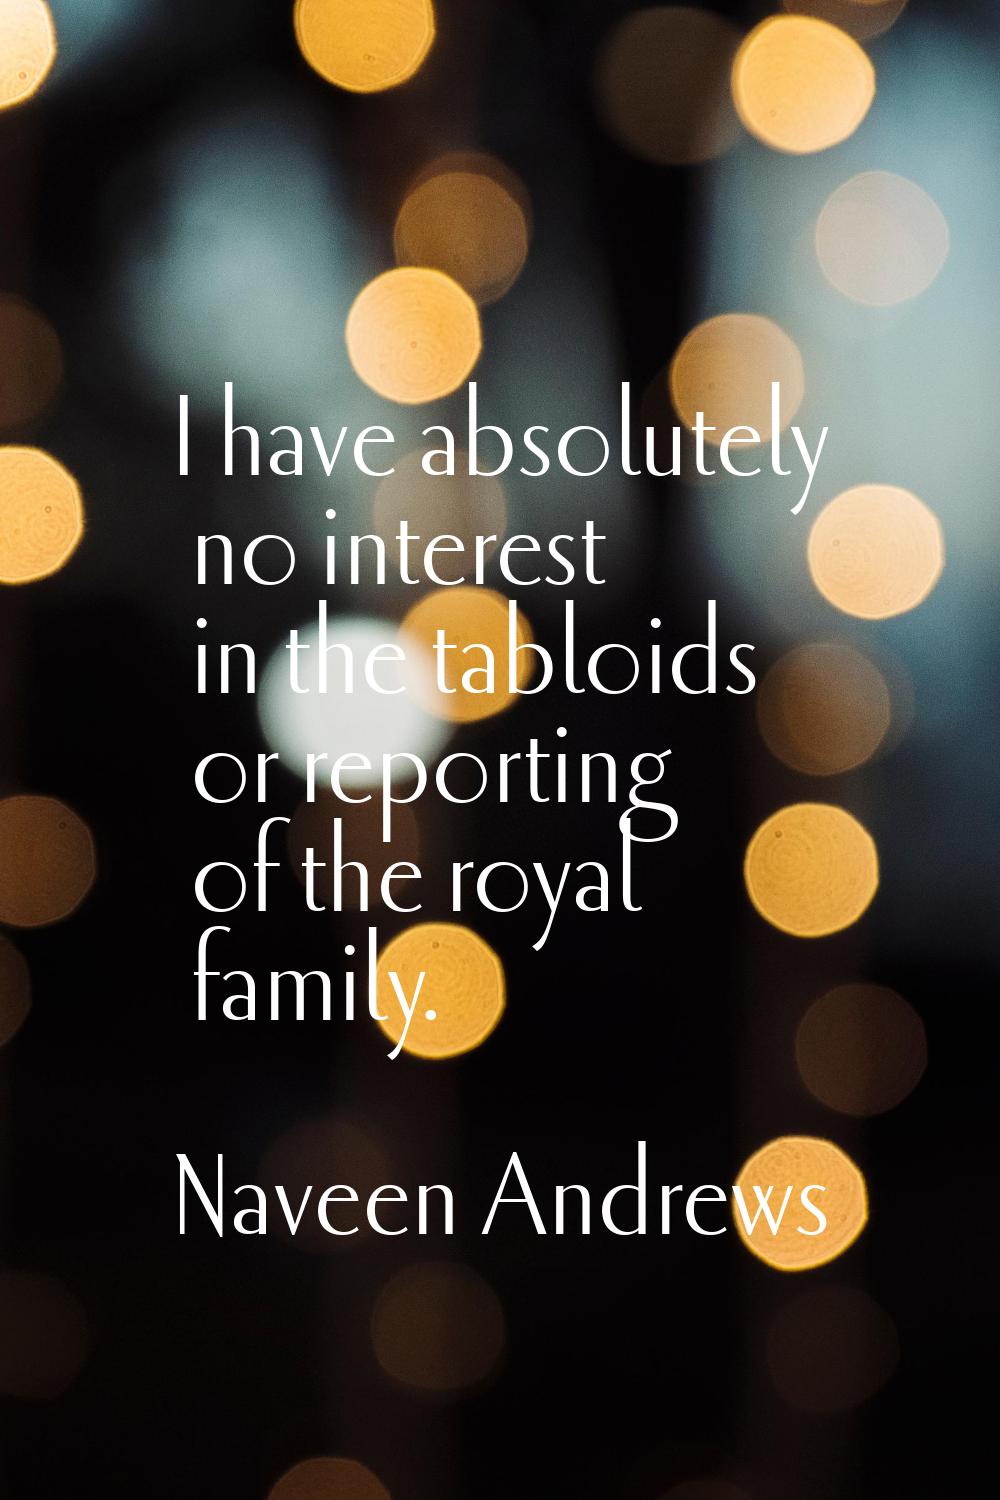 I have absolutely no interest in the tabloids or reporting of the royal family.